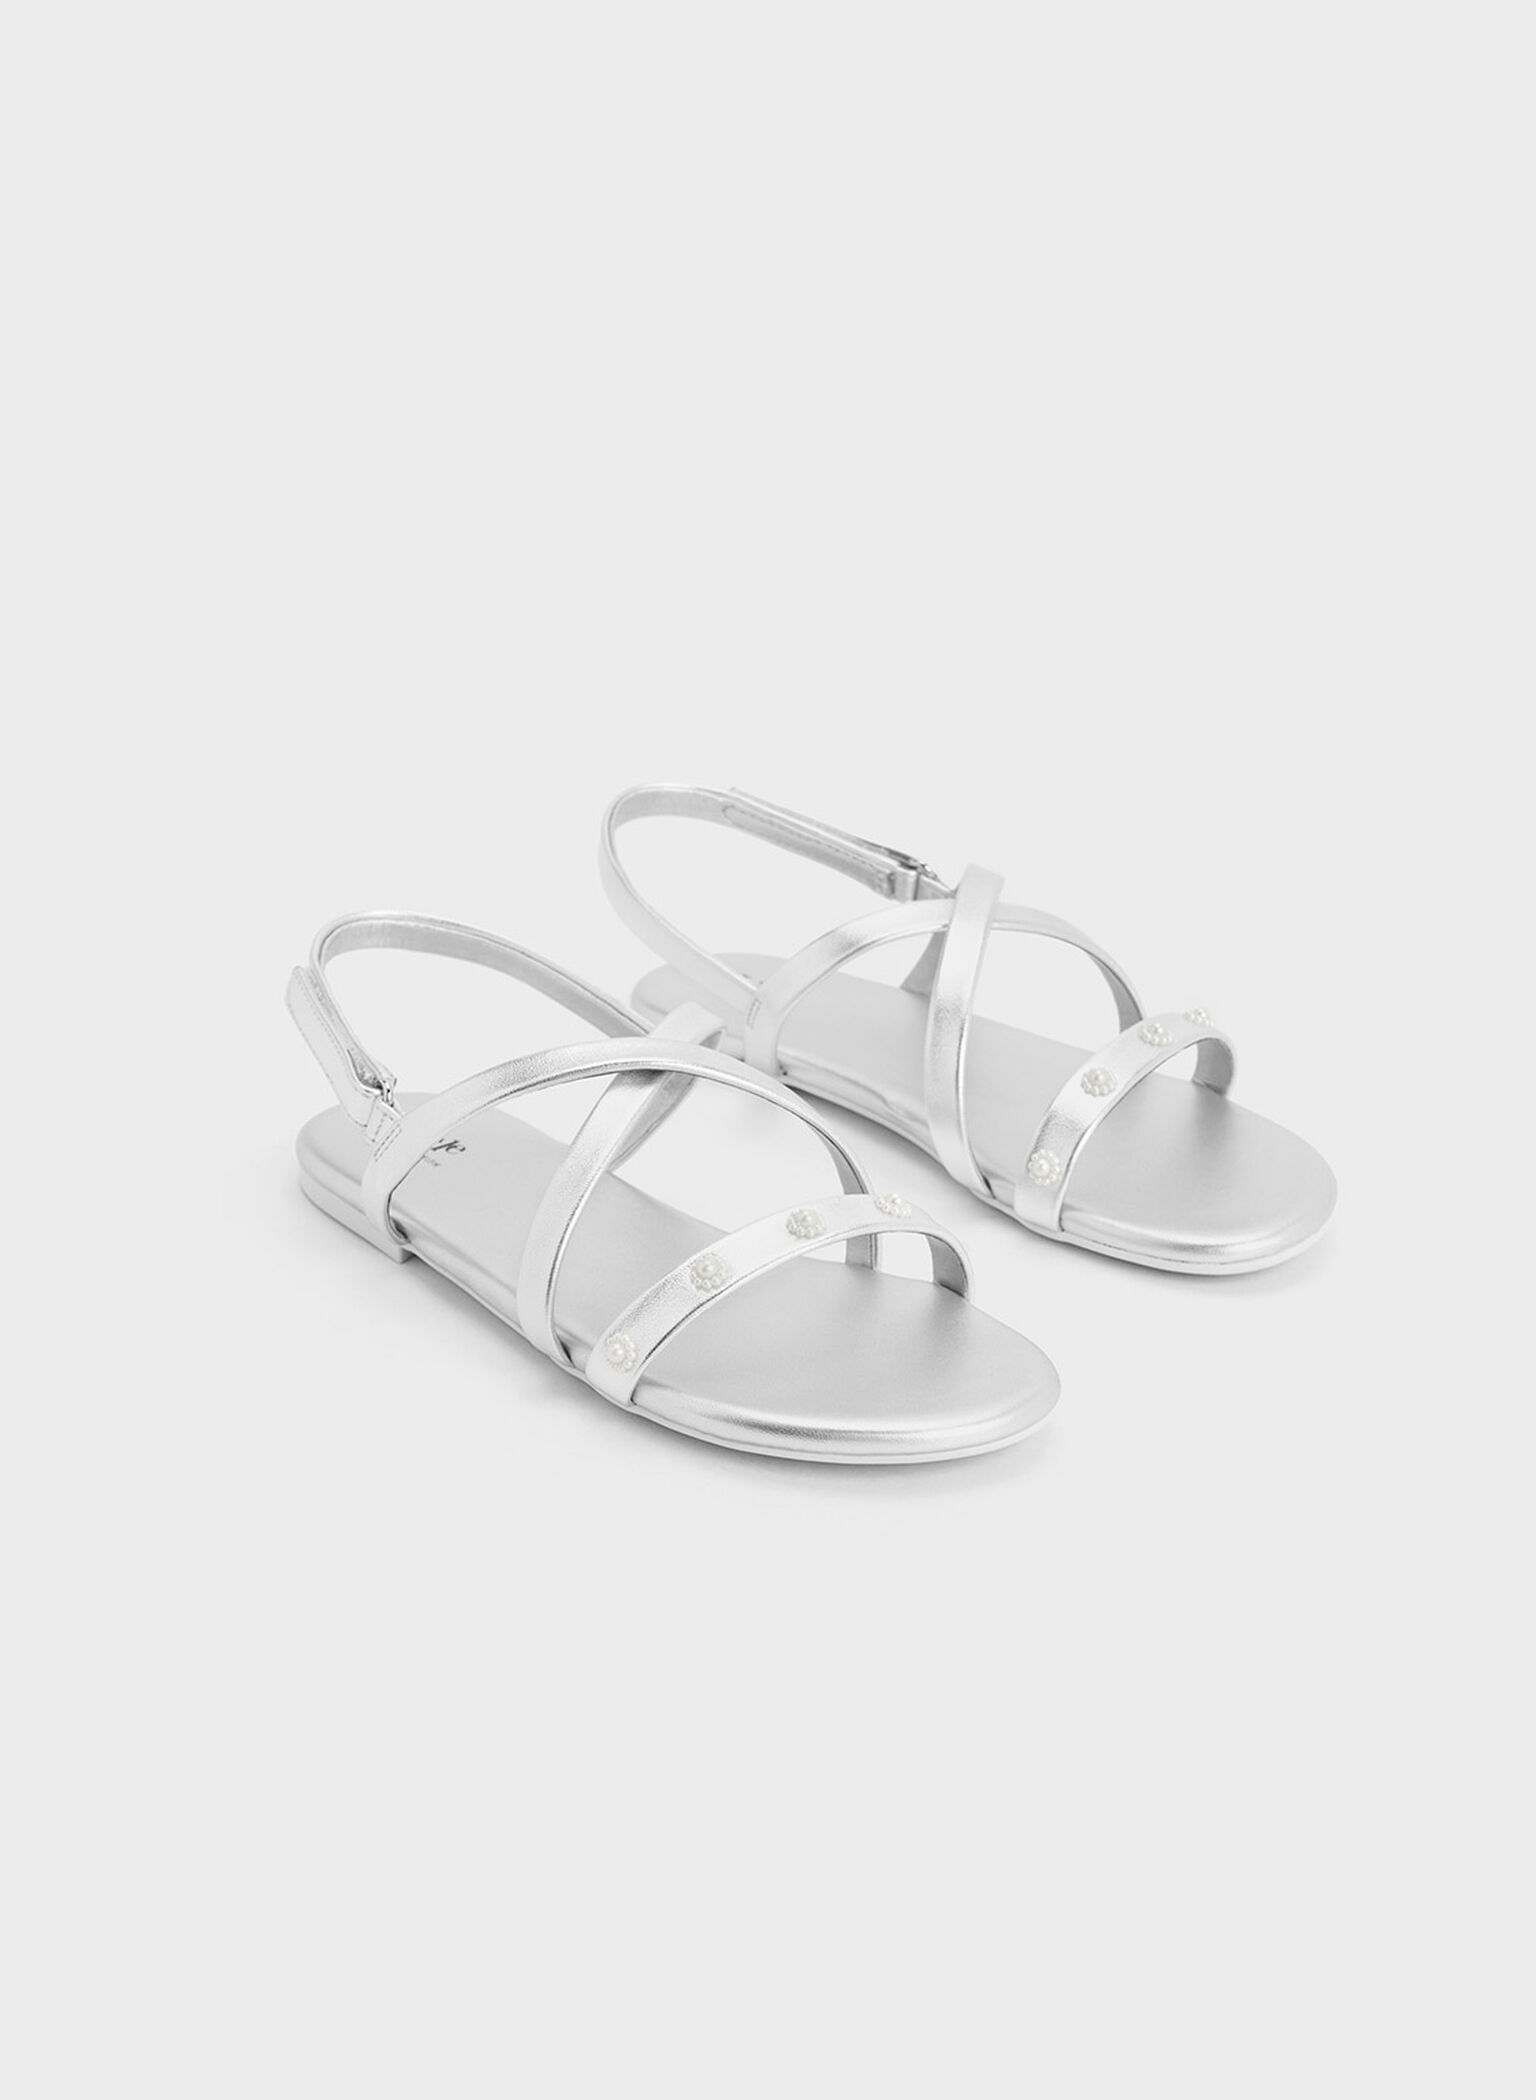 Girls' Flower-Beaded Strappy Sandals, Silver, hi-res